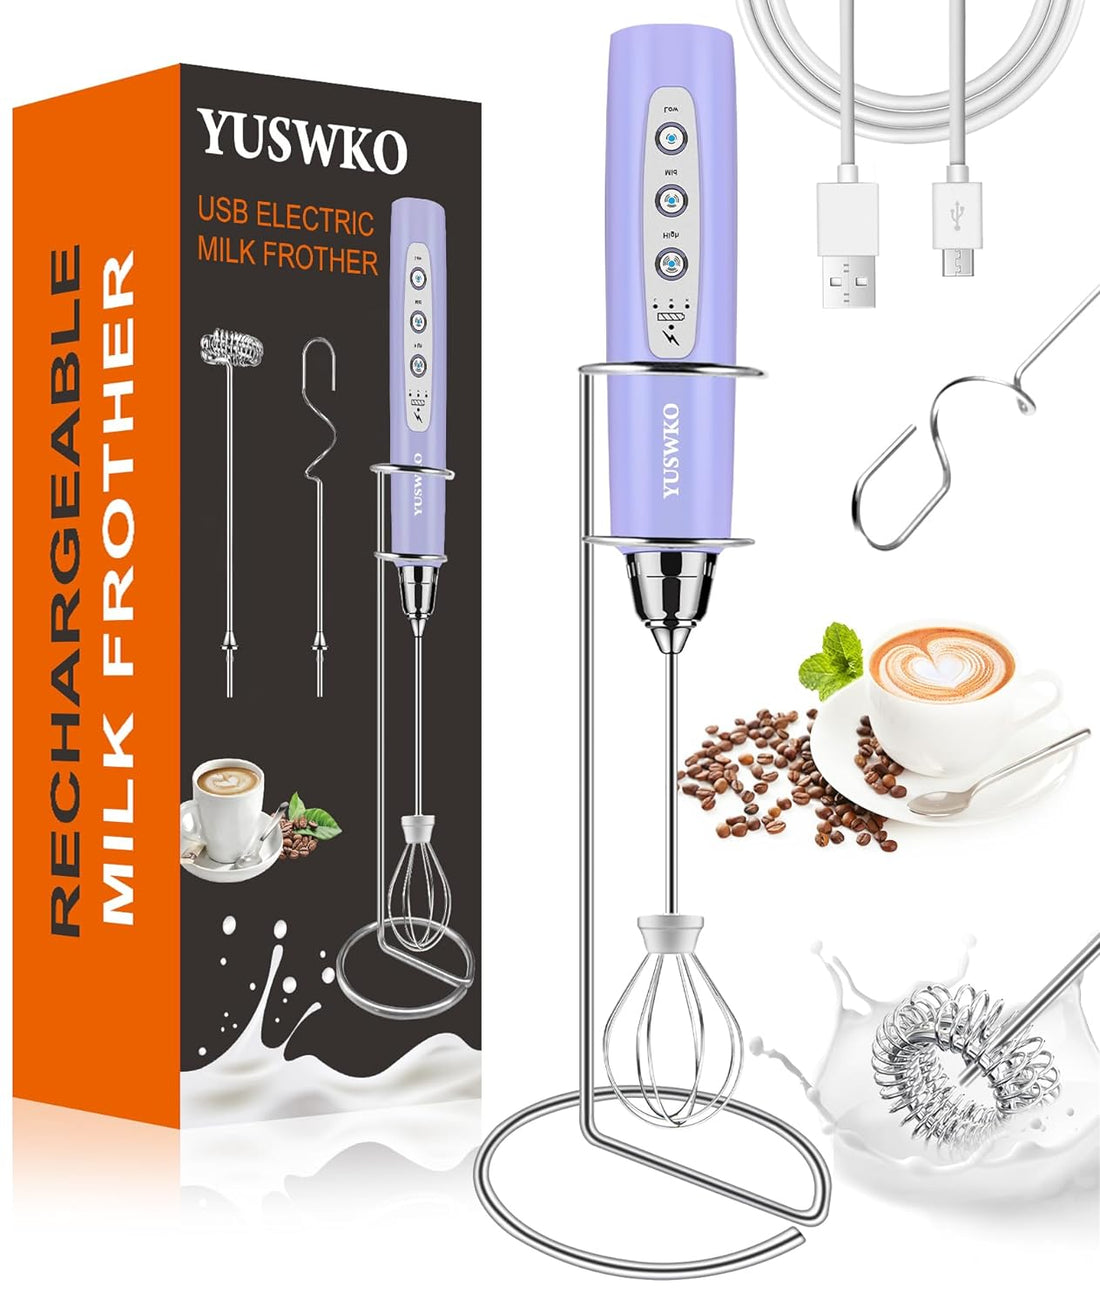 YUSWKO Rechargeable Milk Frother for Coffee with Stand, Handheld Drink Mixer with 3 Heads 3 Speeds Electric Stirrers for Latte, Cappuccino, Hot Chocolate, Egg - Light Purple